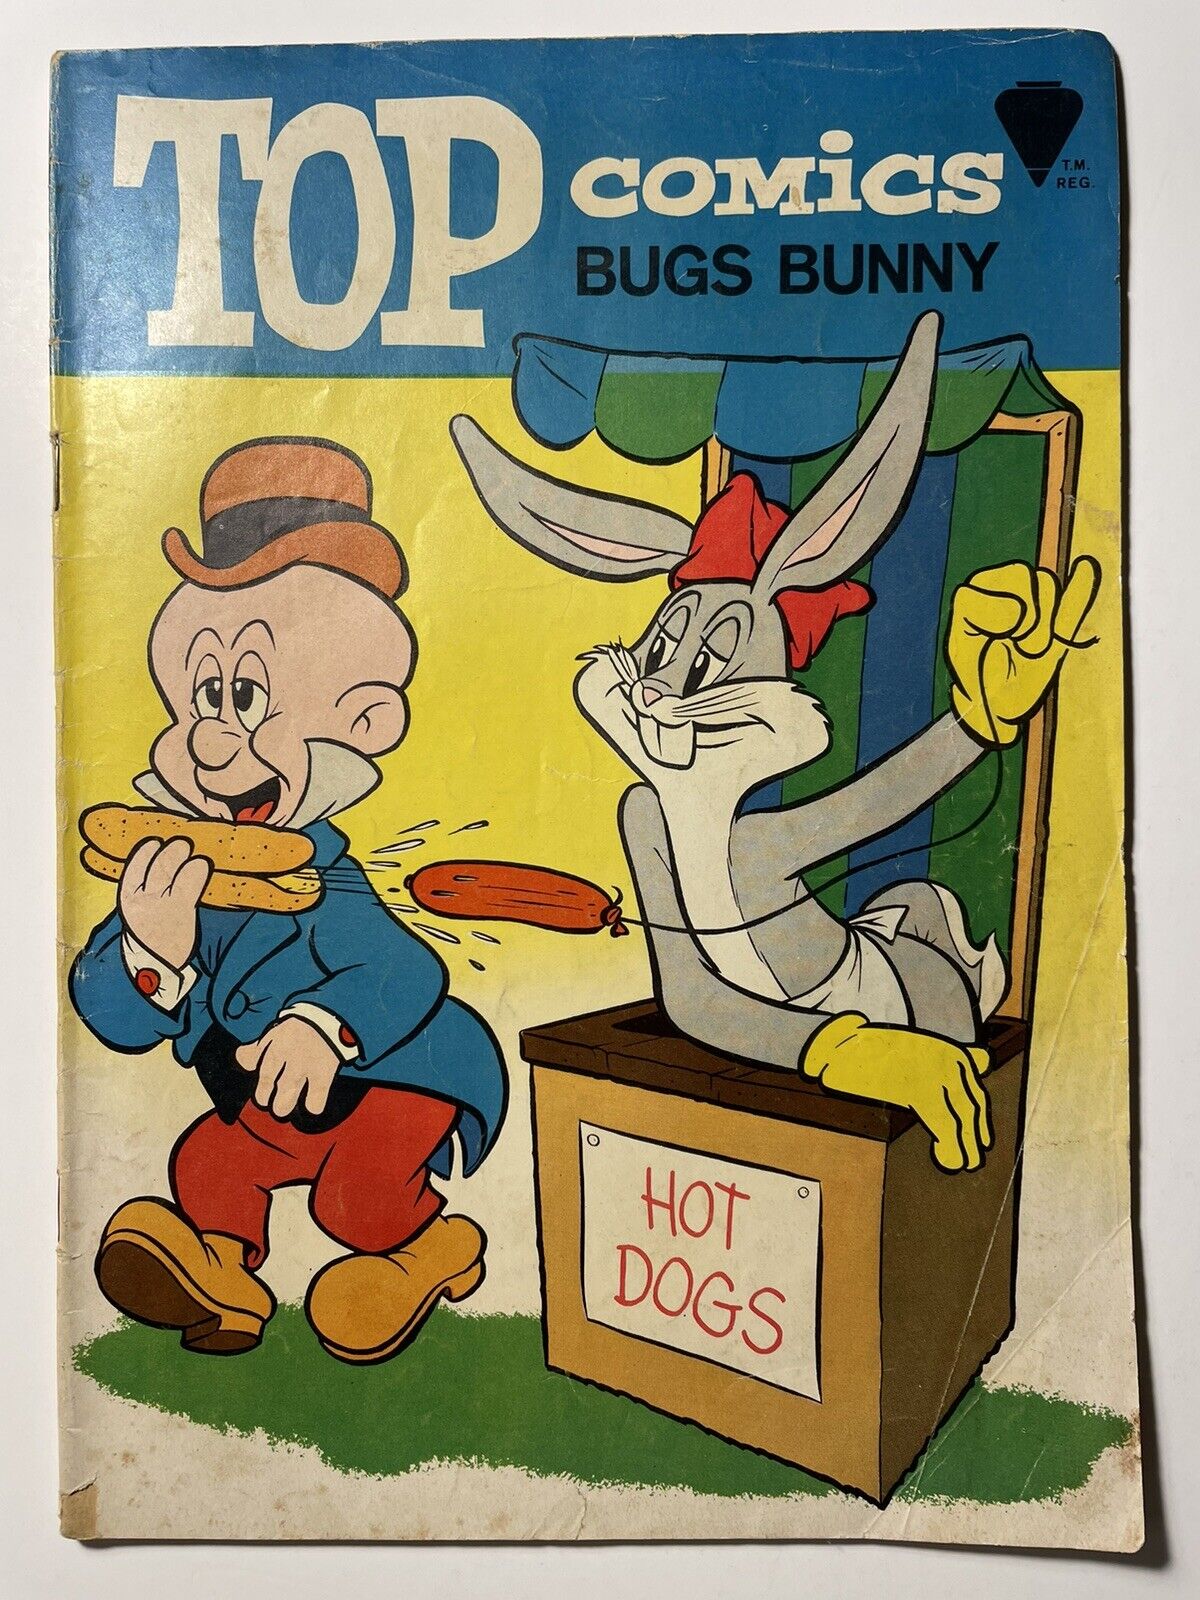 1967 Gold Key TOP Comics BUGS BUNNY Issue #1